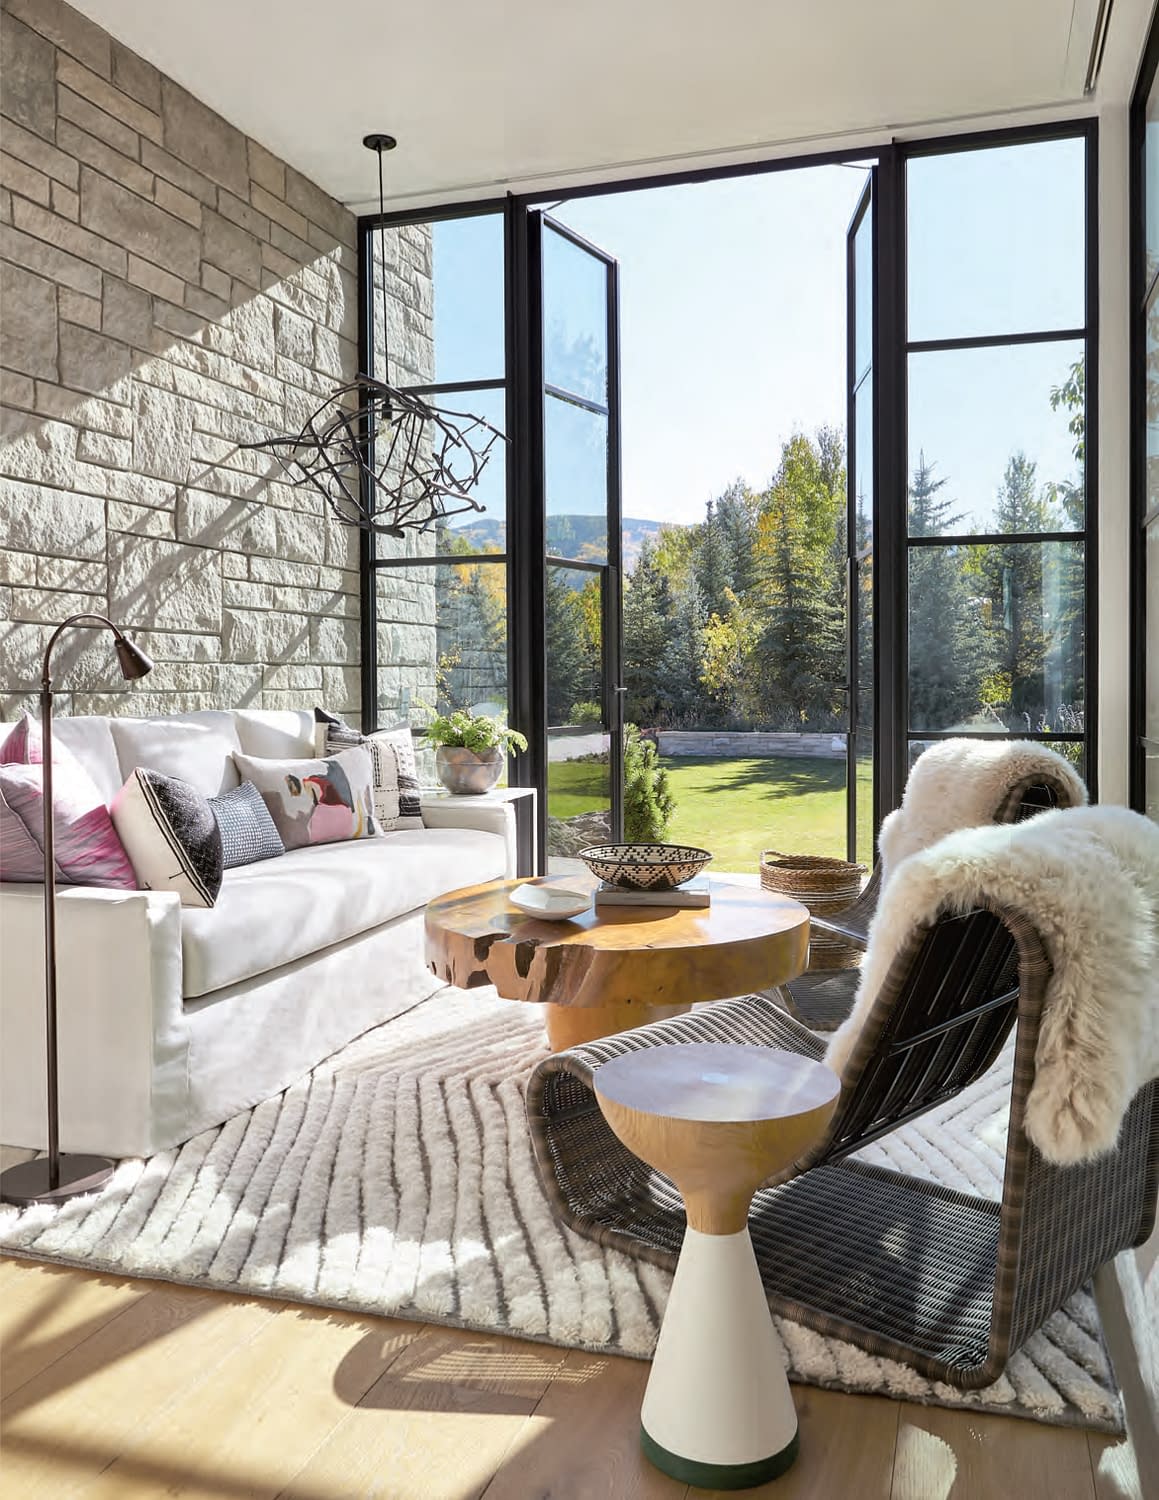 Thermally broken outswing steel doors open the sitting room to breath taking views of Aspen, Colorado